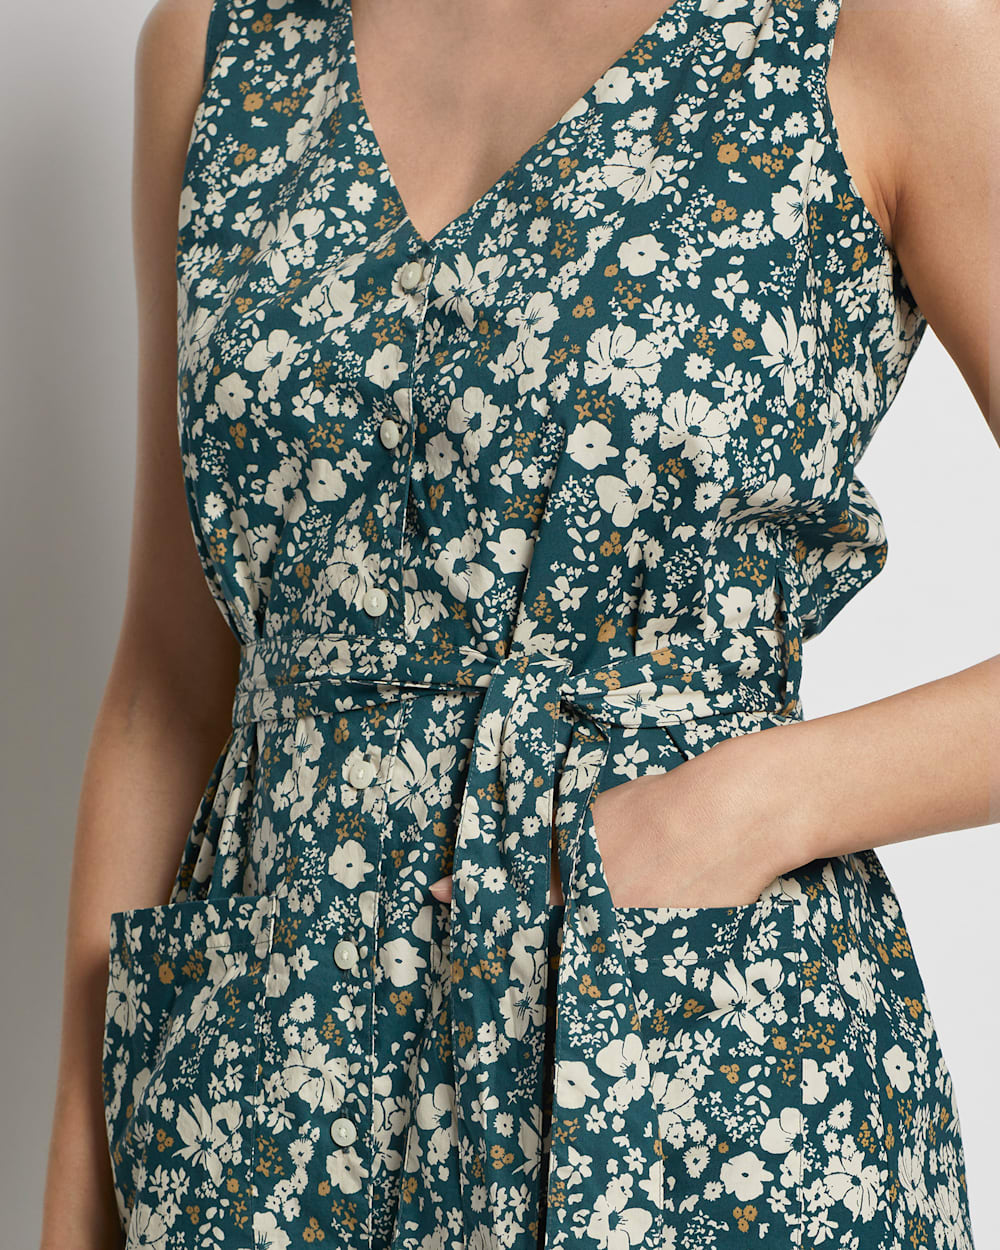 ALTERNATE VIEW OF WOMEN'S SLEEVELESS COTTON DRESS IN PINE GREEN MULTI FLORAL image number 2